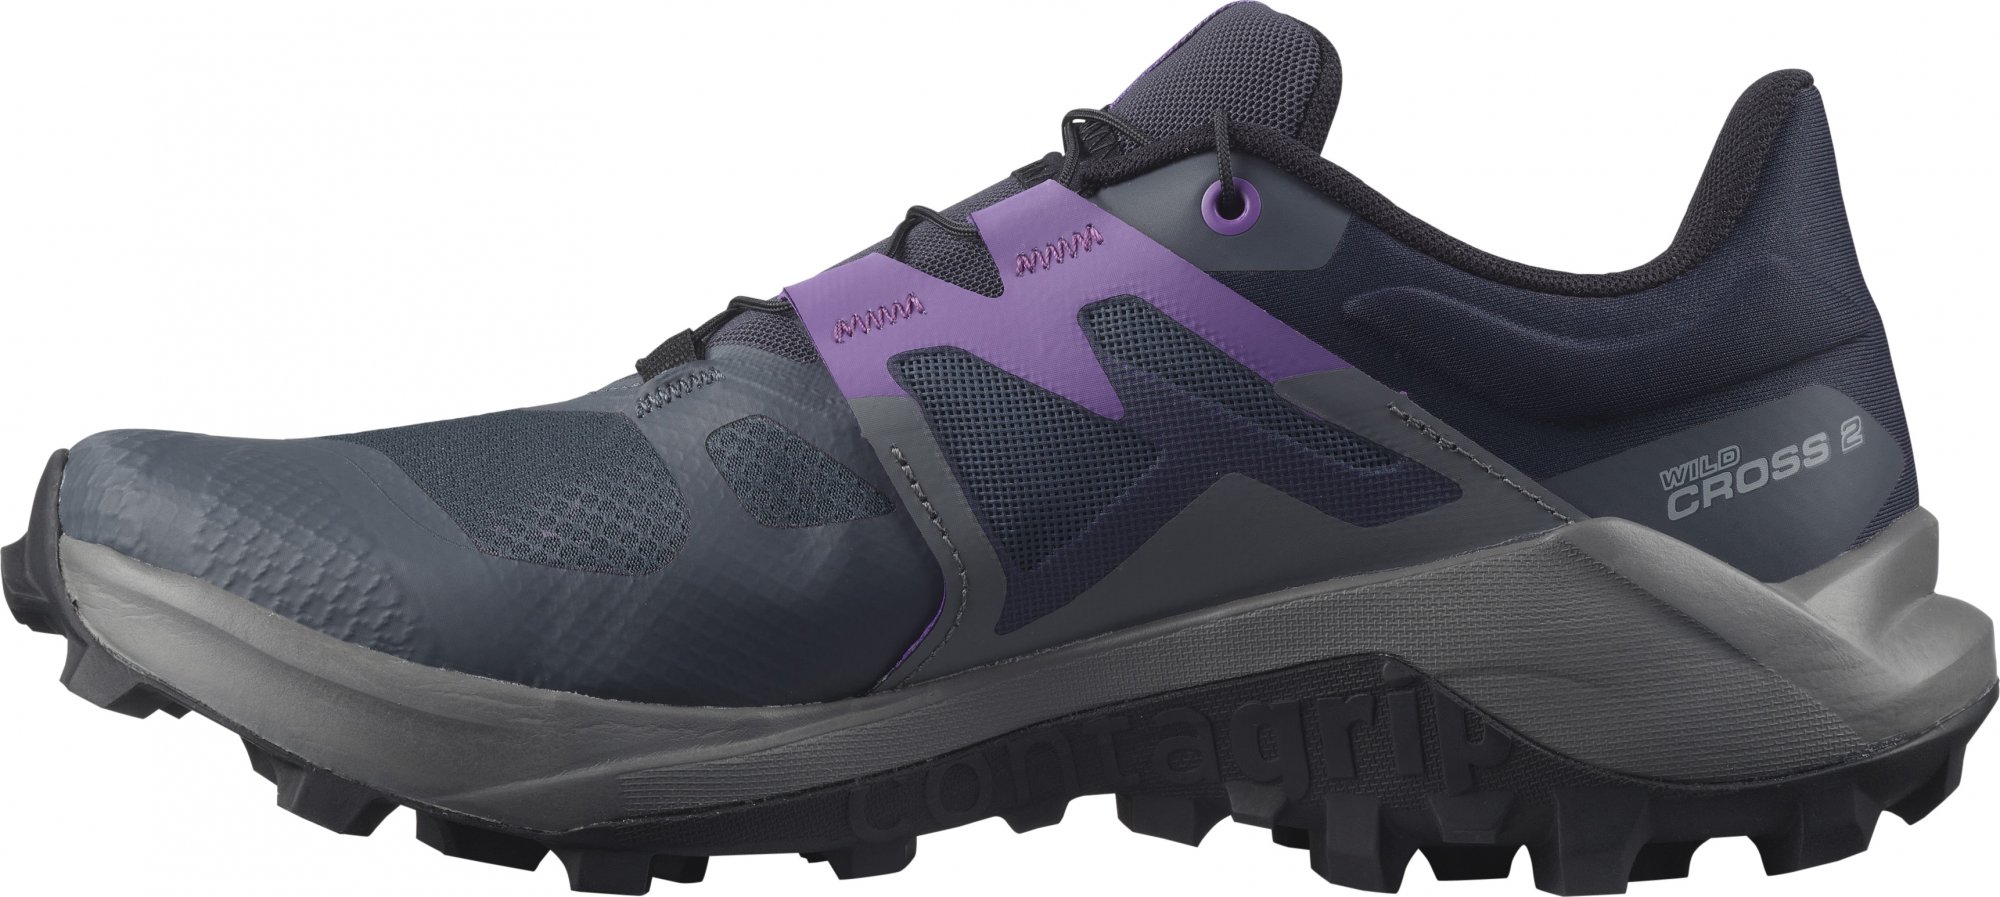 SALOMON WILDCROSS 2 W India Ink/Quiet Shade/Royal Lilac